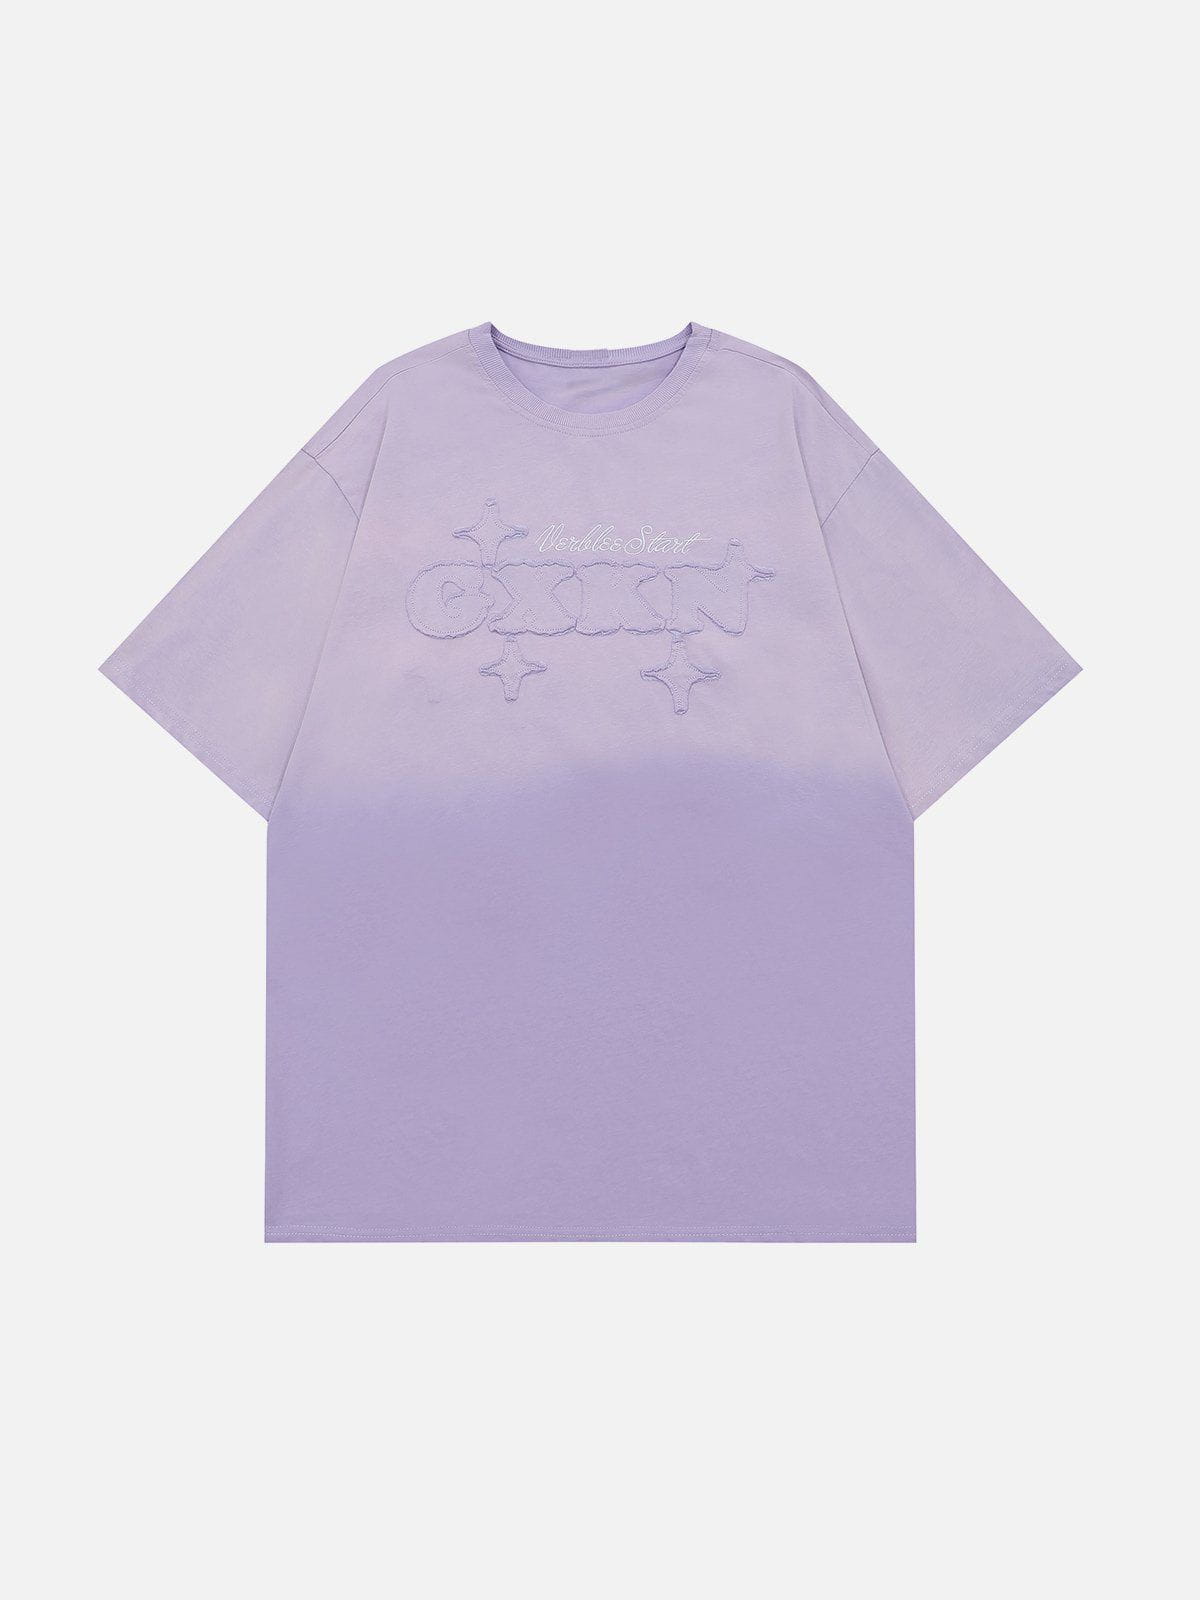 Sneakerland™ - Applique Embroidery Gradient Star Tee